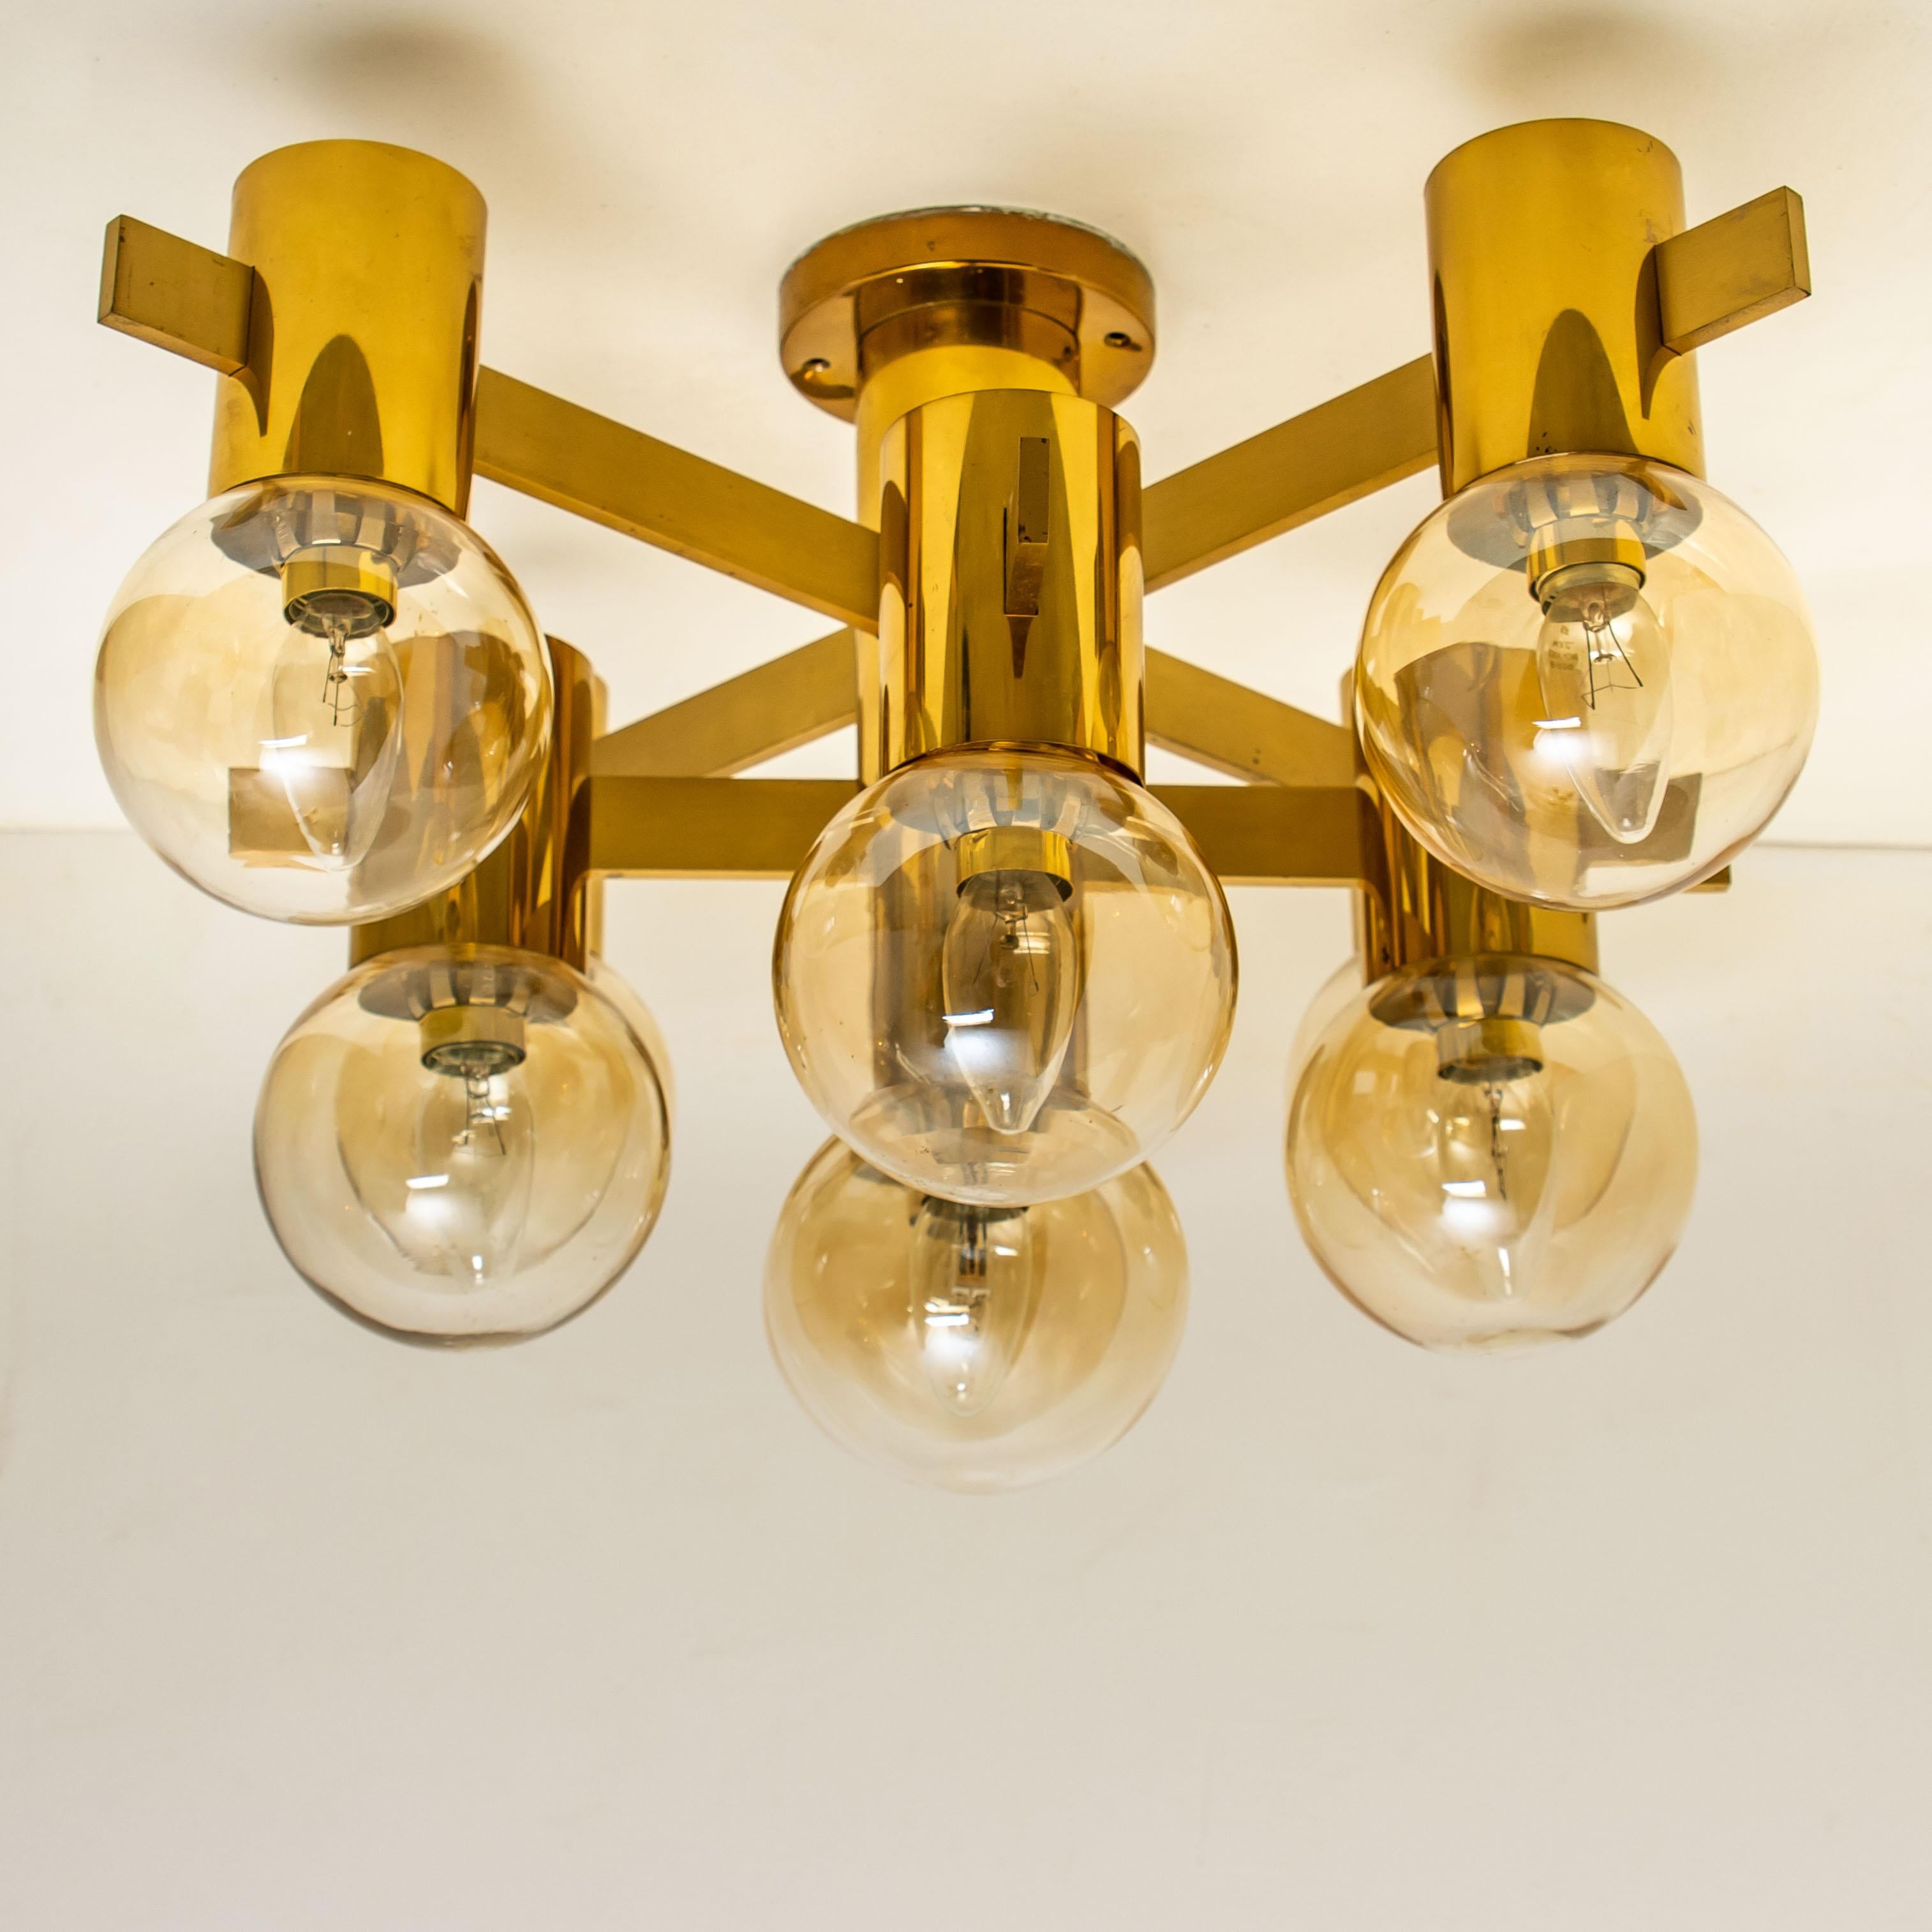 This stunning set of brass light fixtures with smoked glass bowls and gold-plated fittings was produced in the 1970s in the style of Hans-Agne Jakobsson. Illuminates beautifully.

Size of the flush mount large
D 23.6 in. (60 cm) x H 13.8 in. (35